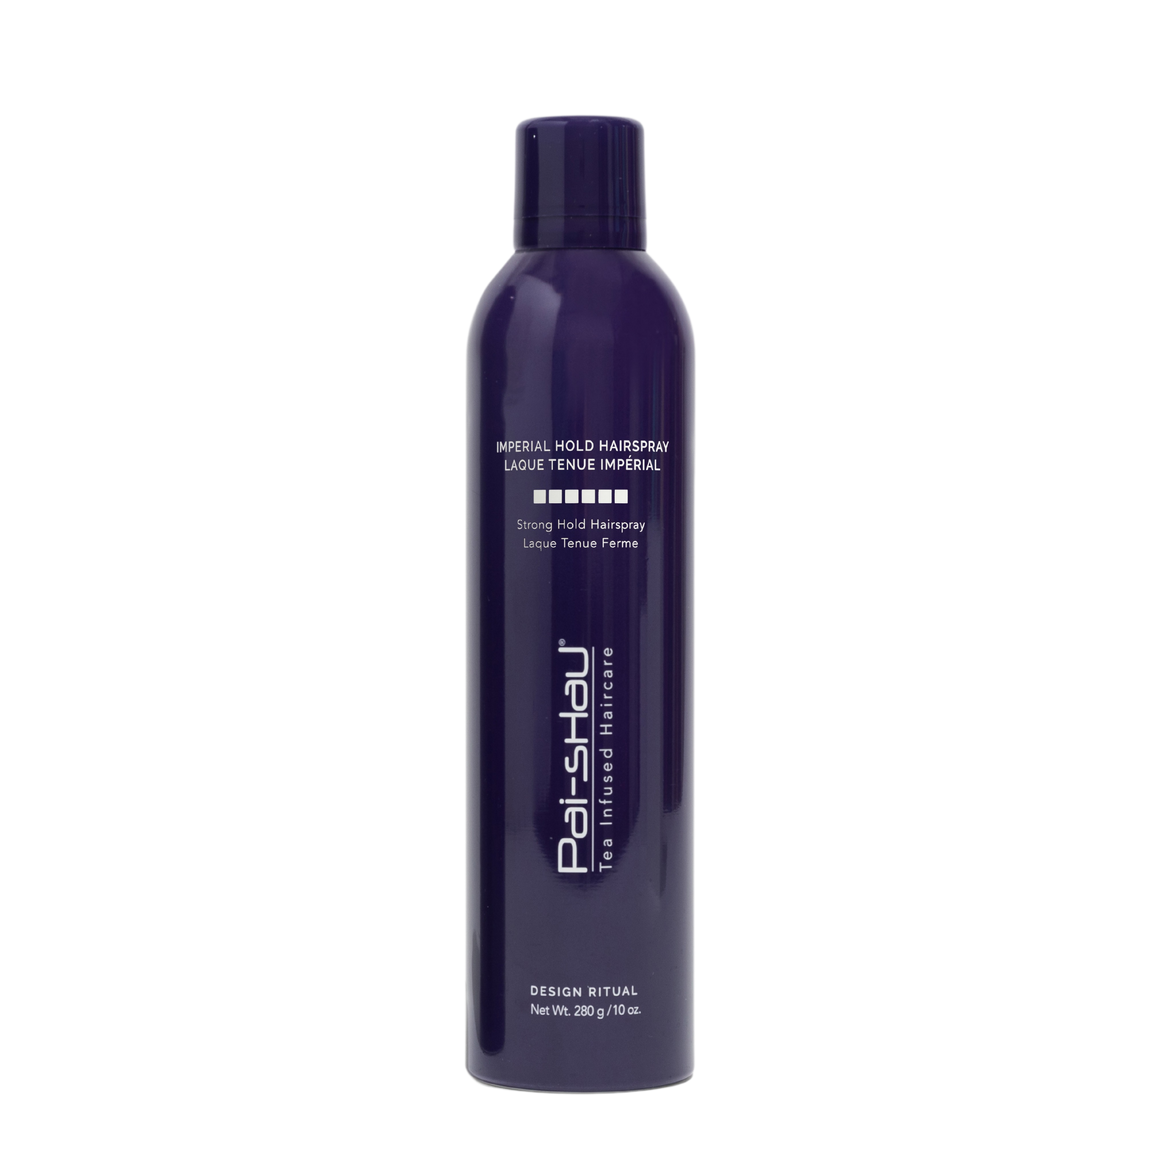 Pai-Shau - Imperial Hold Hairspray |50 ml| - by Pai-Shau |ProCare Outlet|